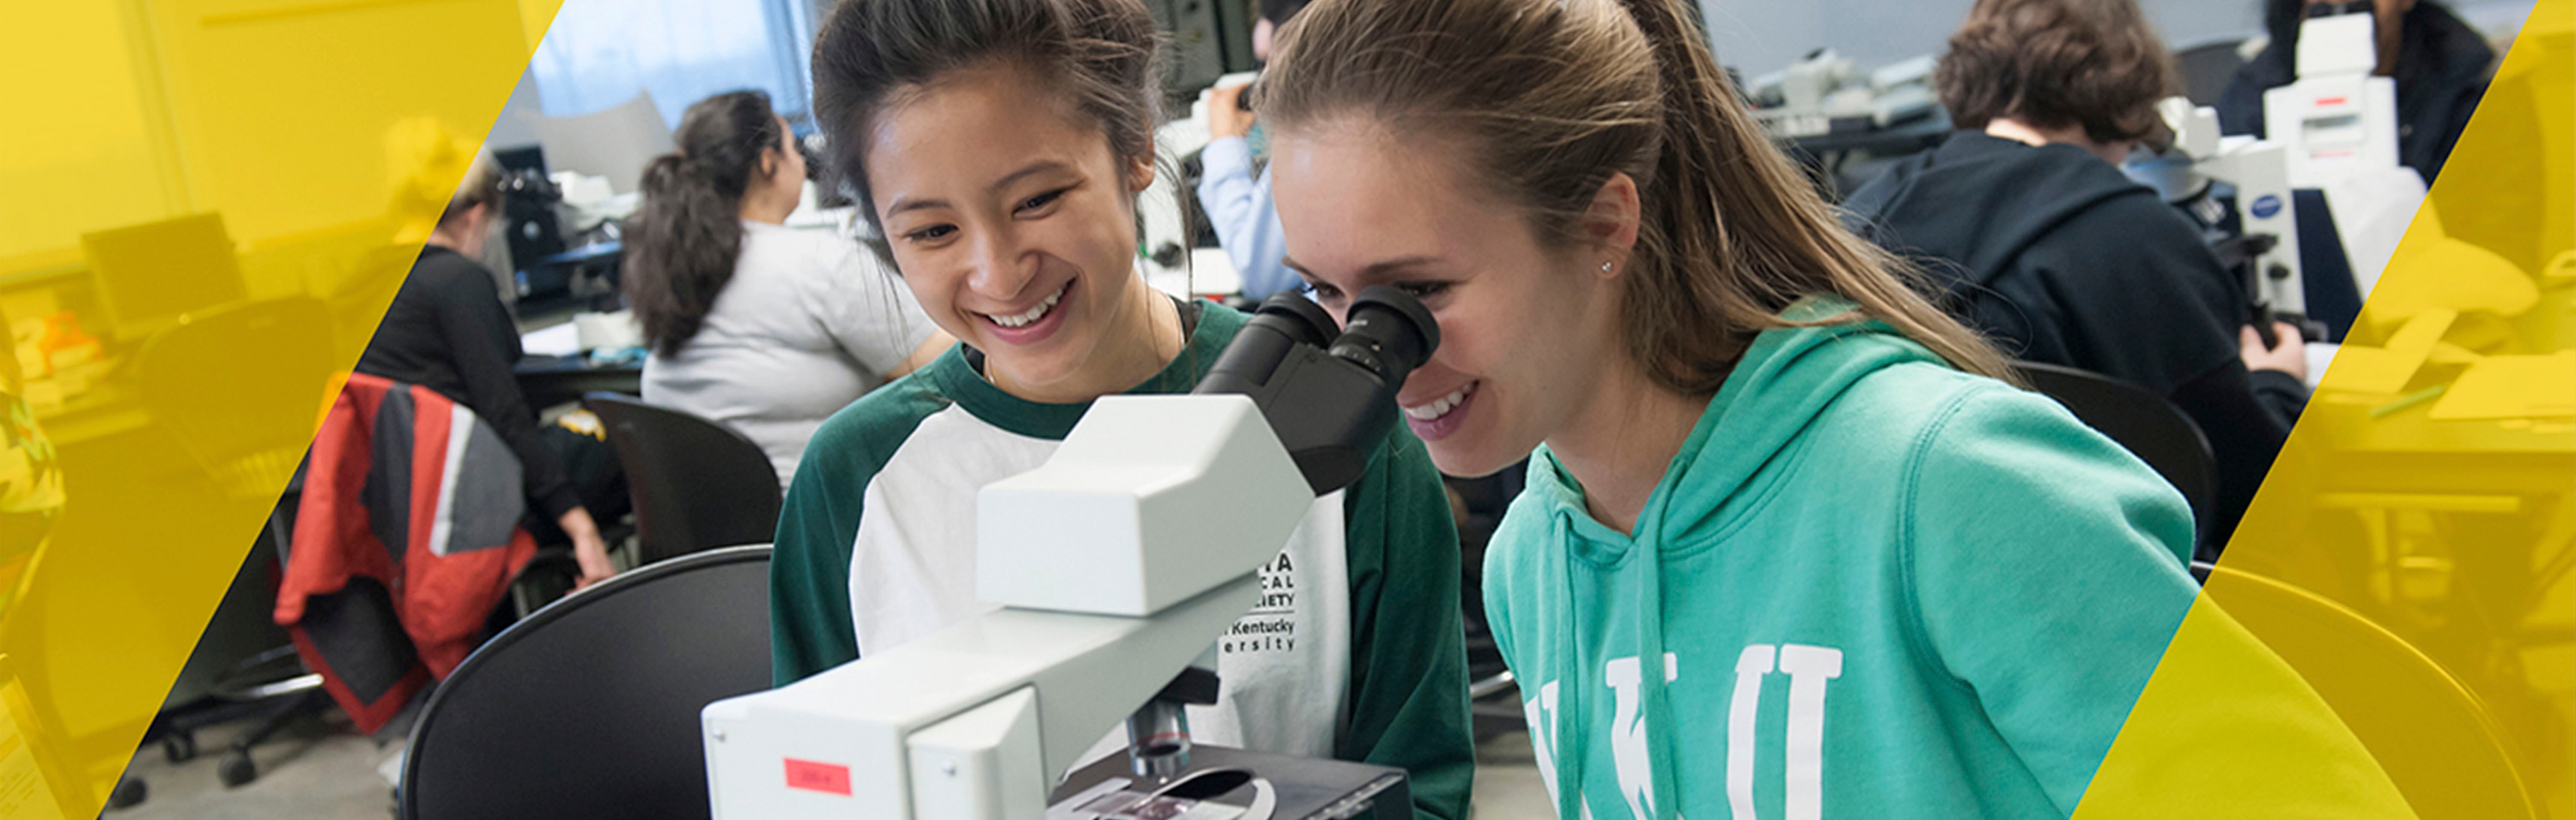 Two students look through microscope